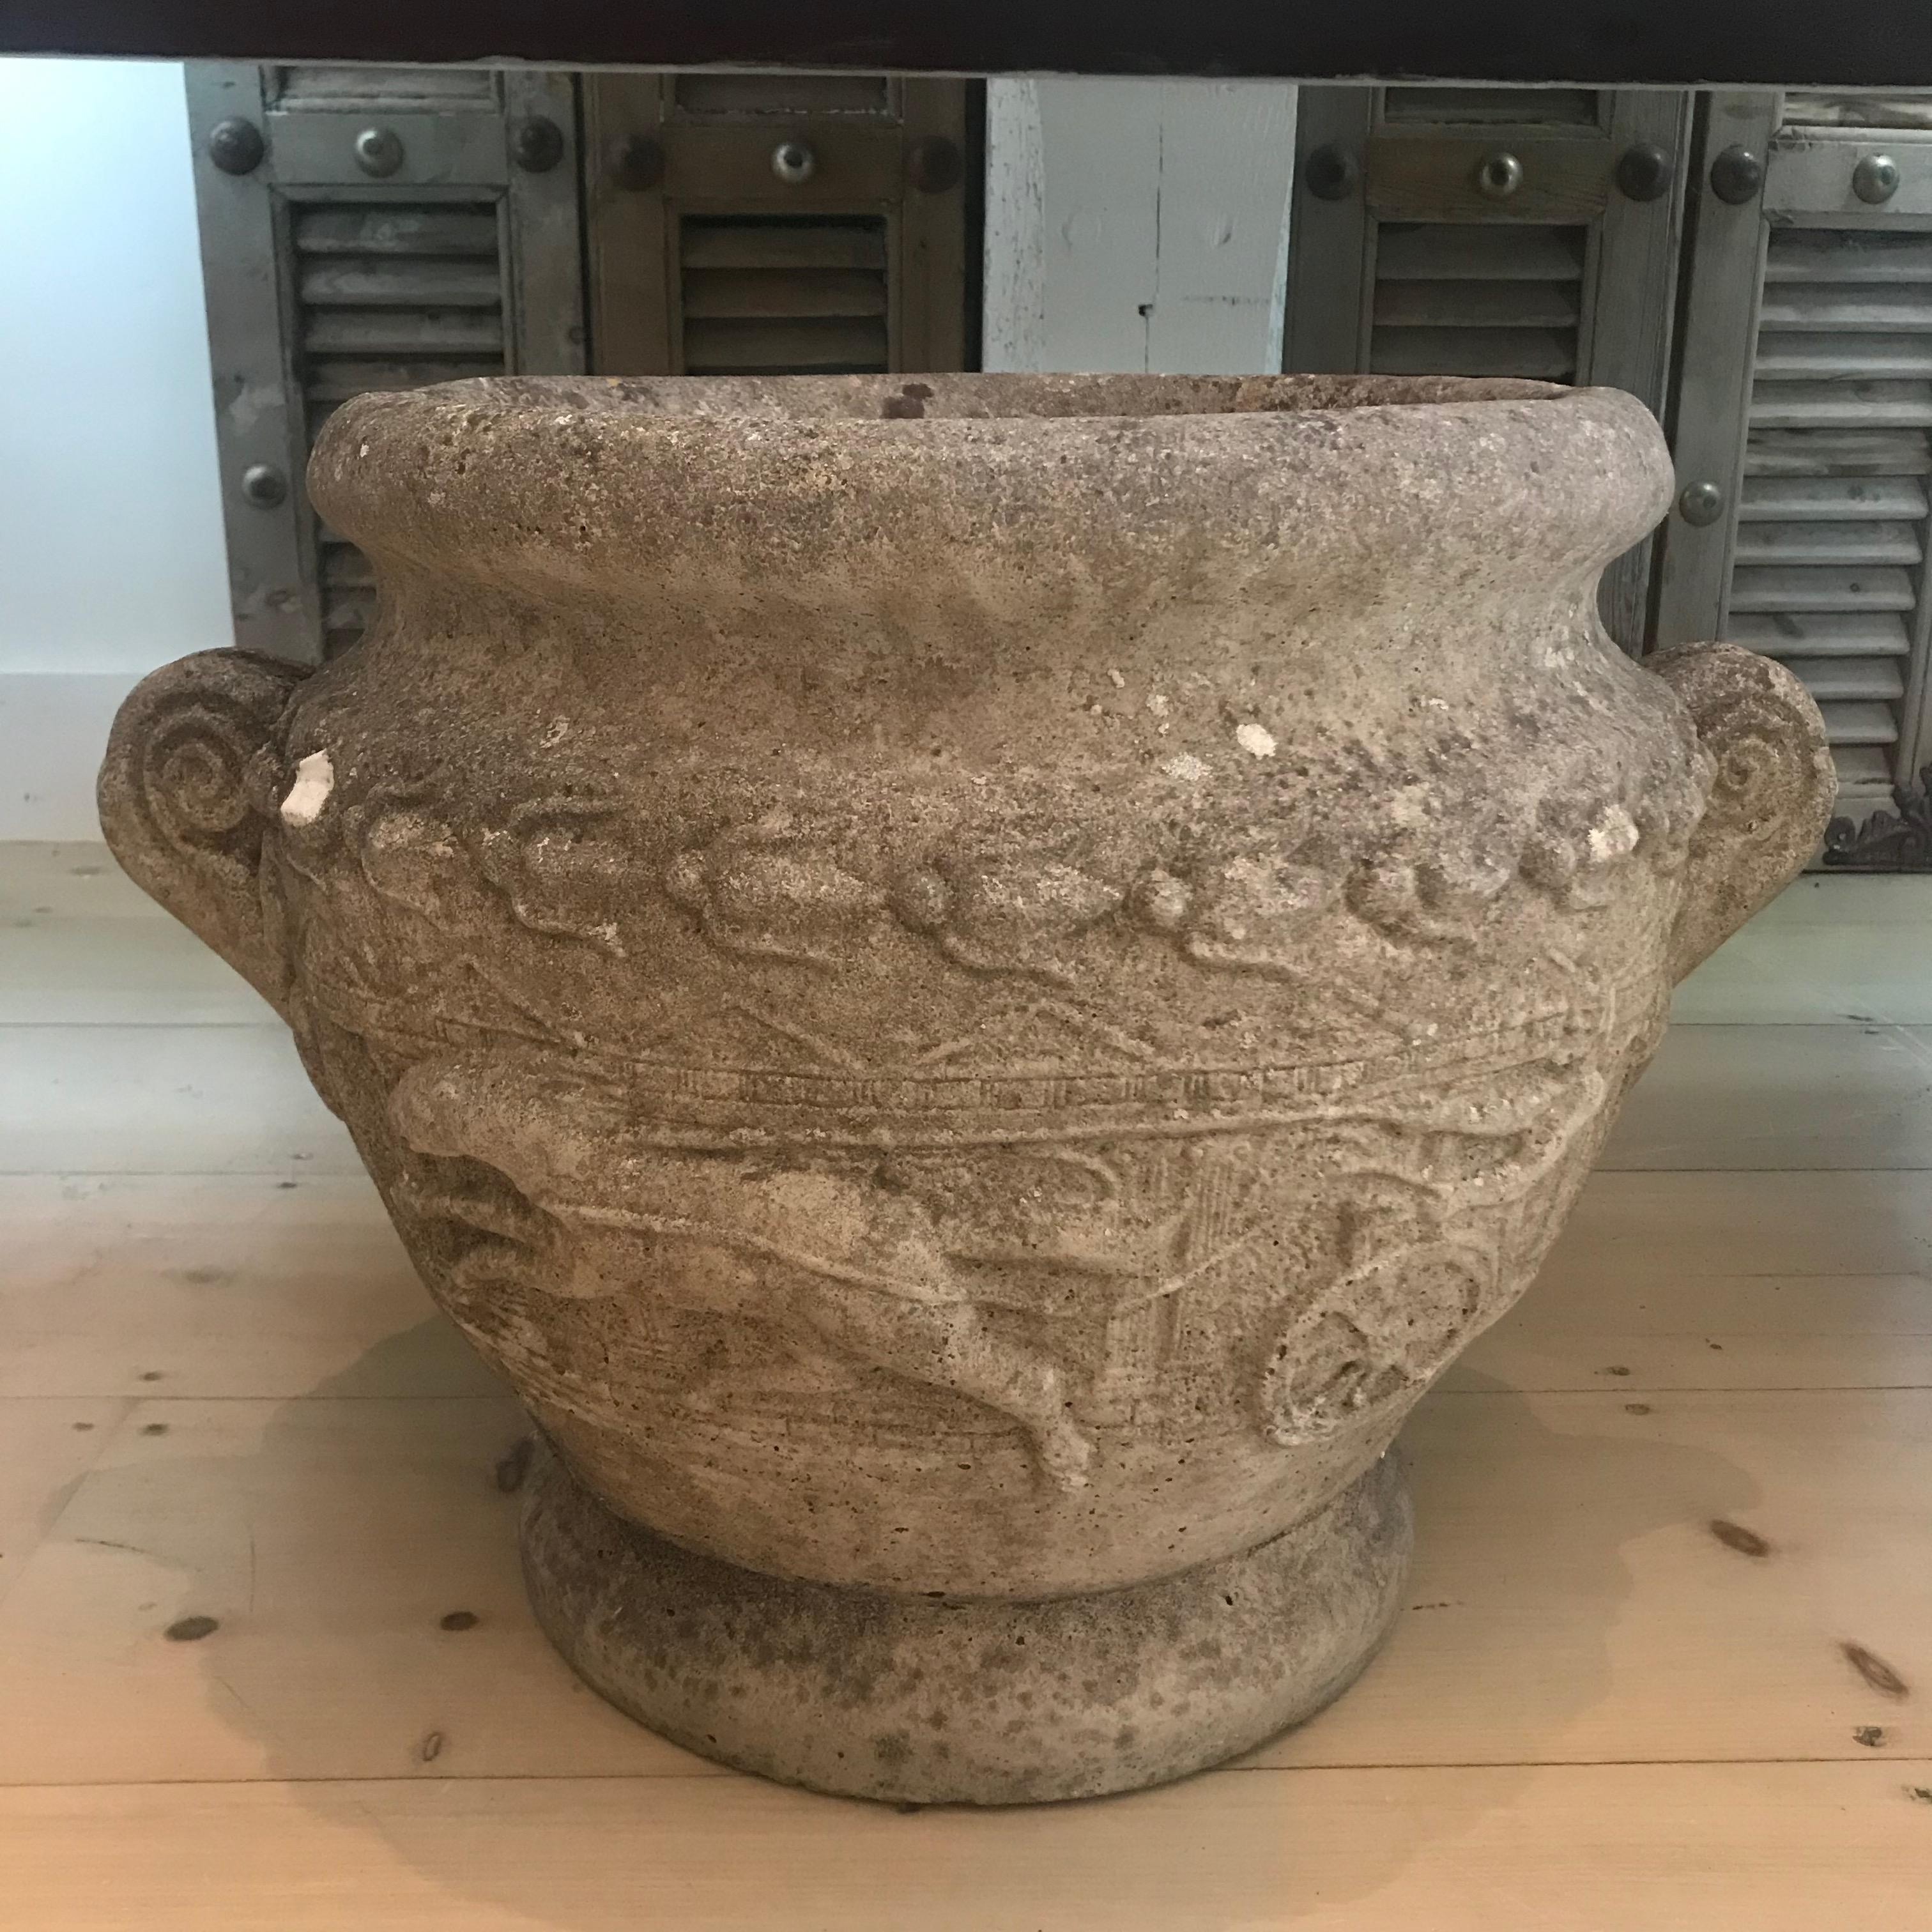 This pair of early 19th century stone urns were discovered in Bordeaux, France. The exquisite carvings on the sides depict a Roman chariot and horse scene. This urn would make a great garden planter or unique entryway piece.
Measures: Width